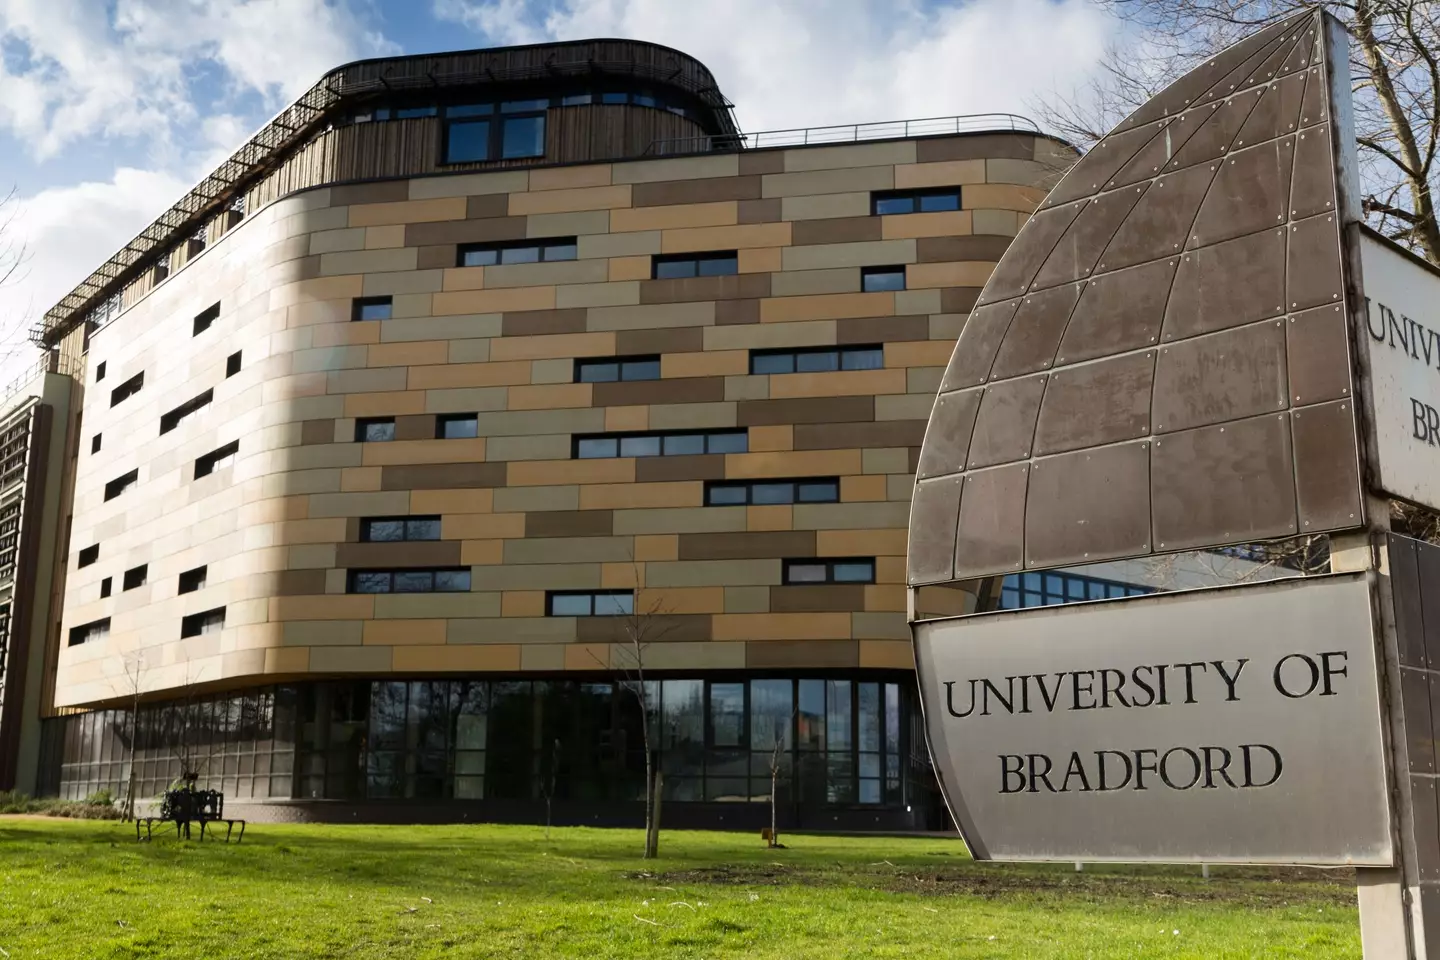 The initiative was launched after reports of harassment around the University of Bradford.